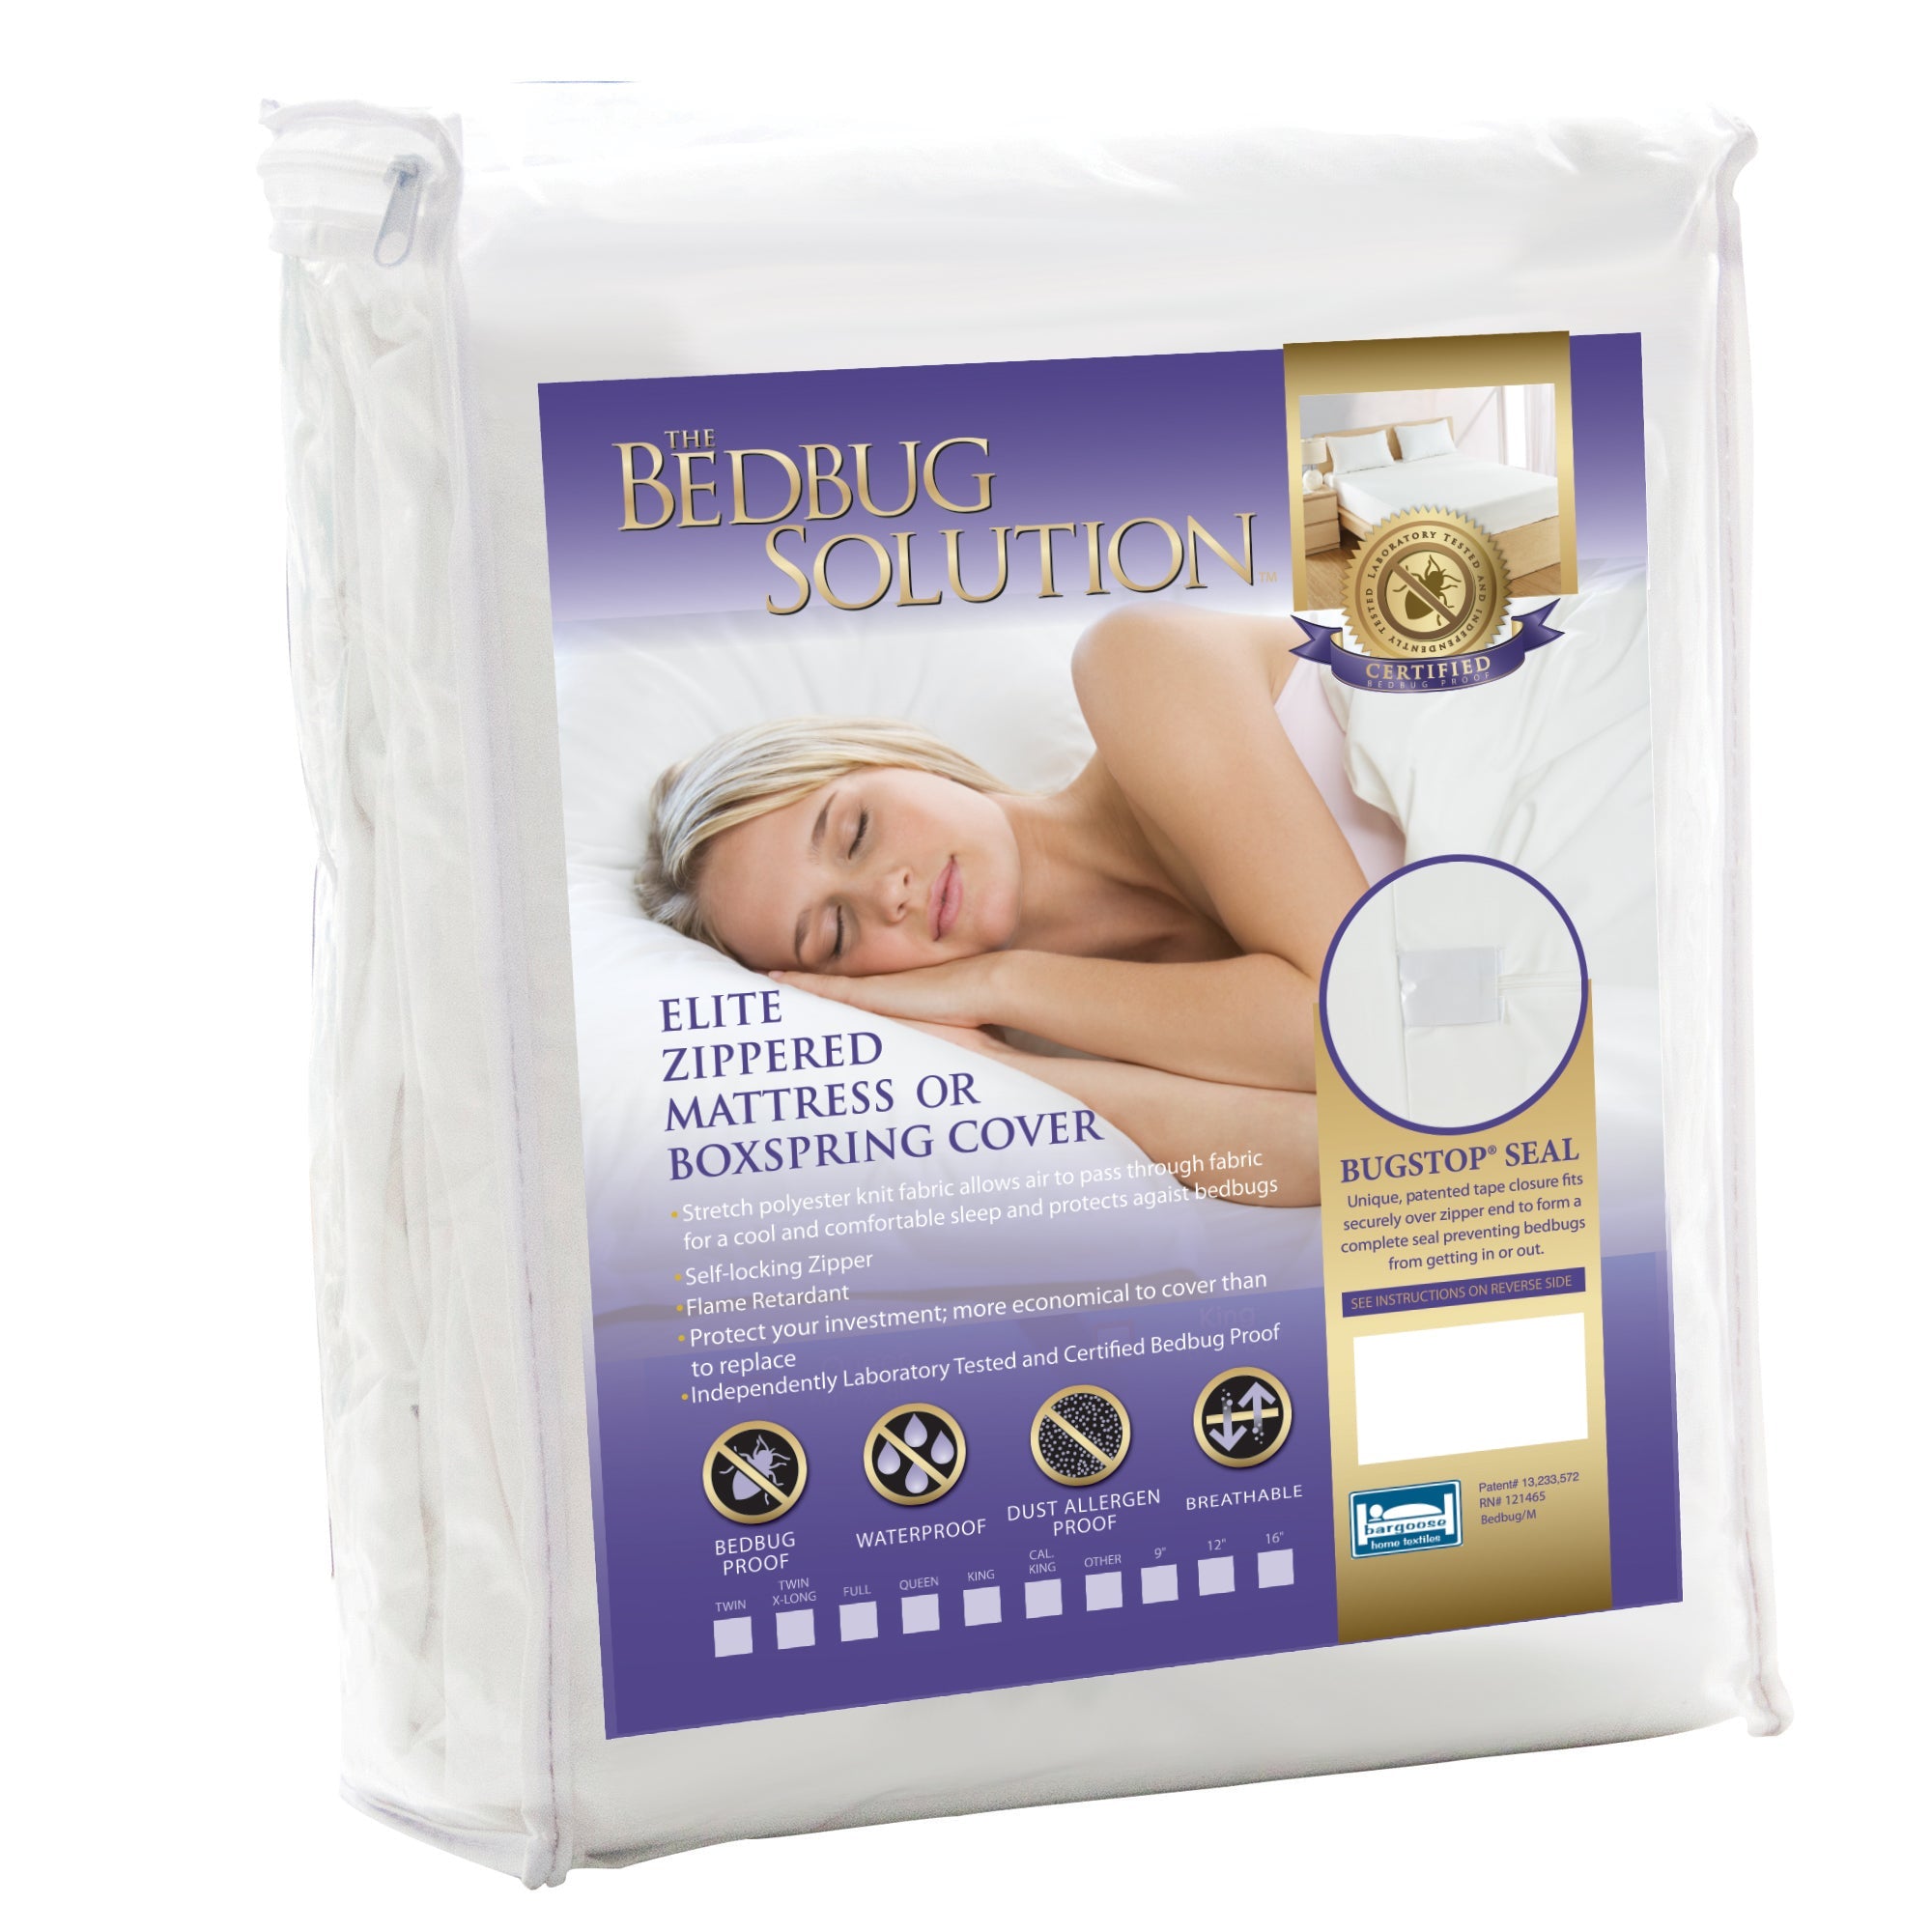 Home Collections Bed Bug & Spill Proof Mattress Protector White Twin